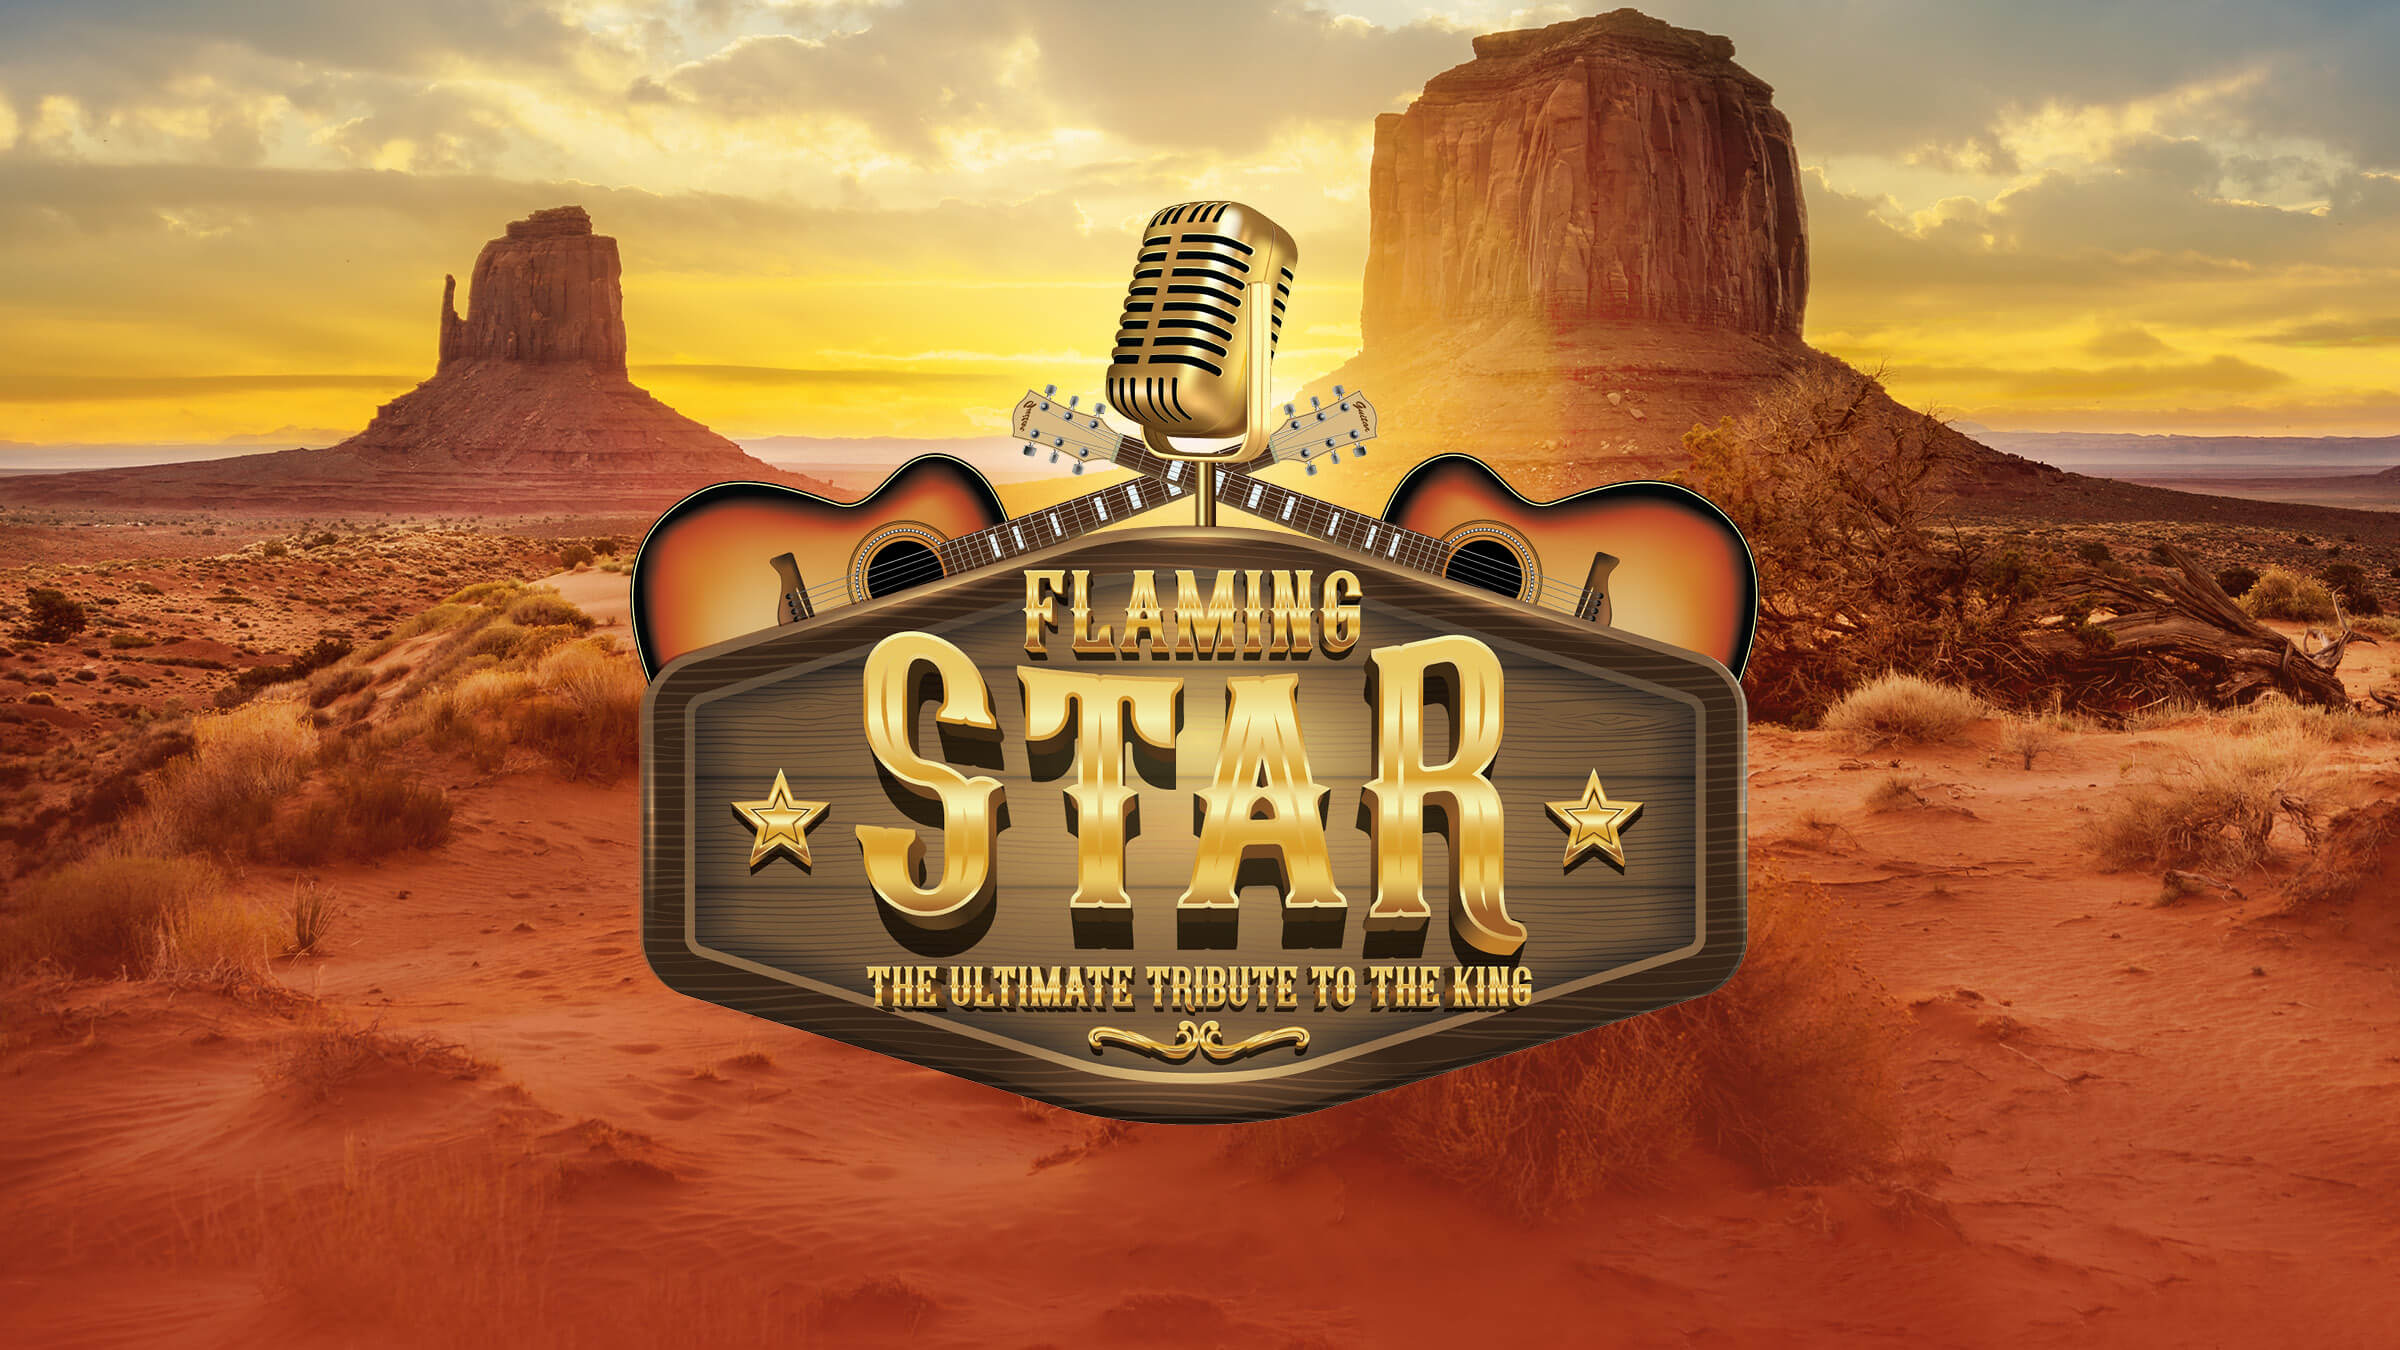 Flaming Star: The Ultimate Tribute to the King